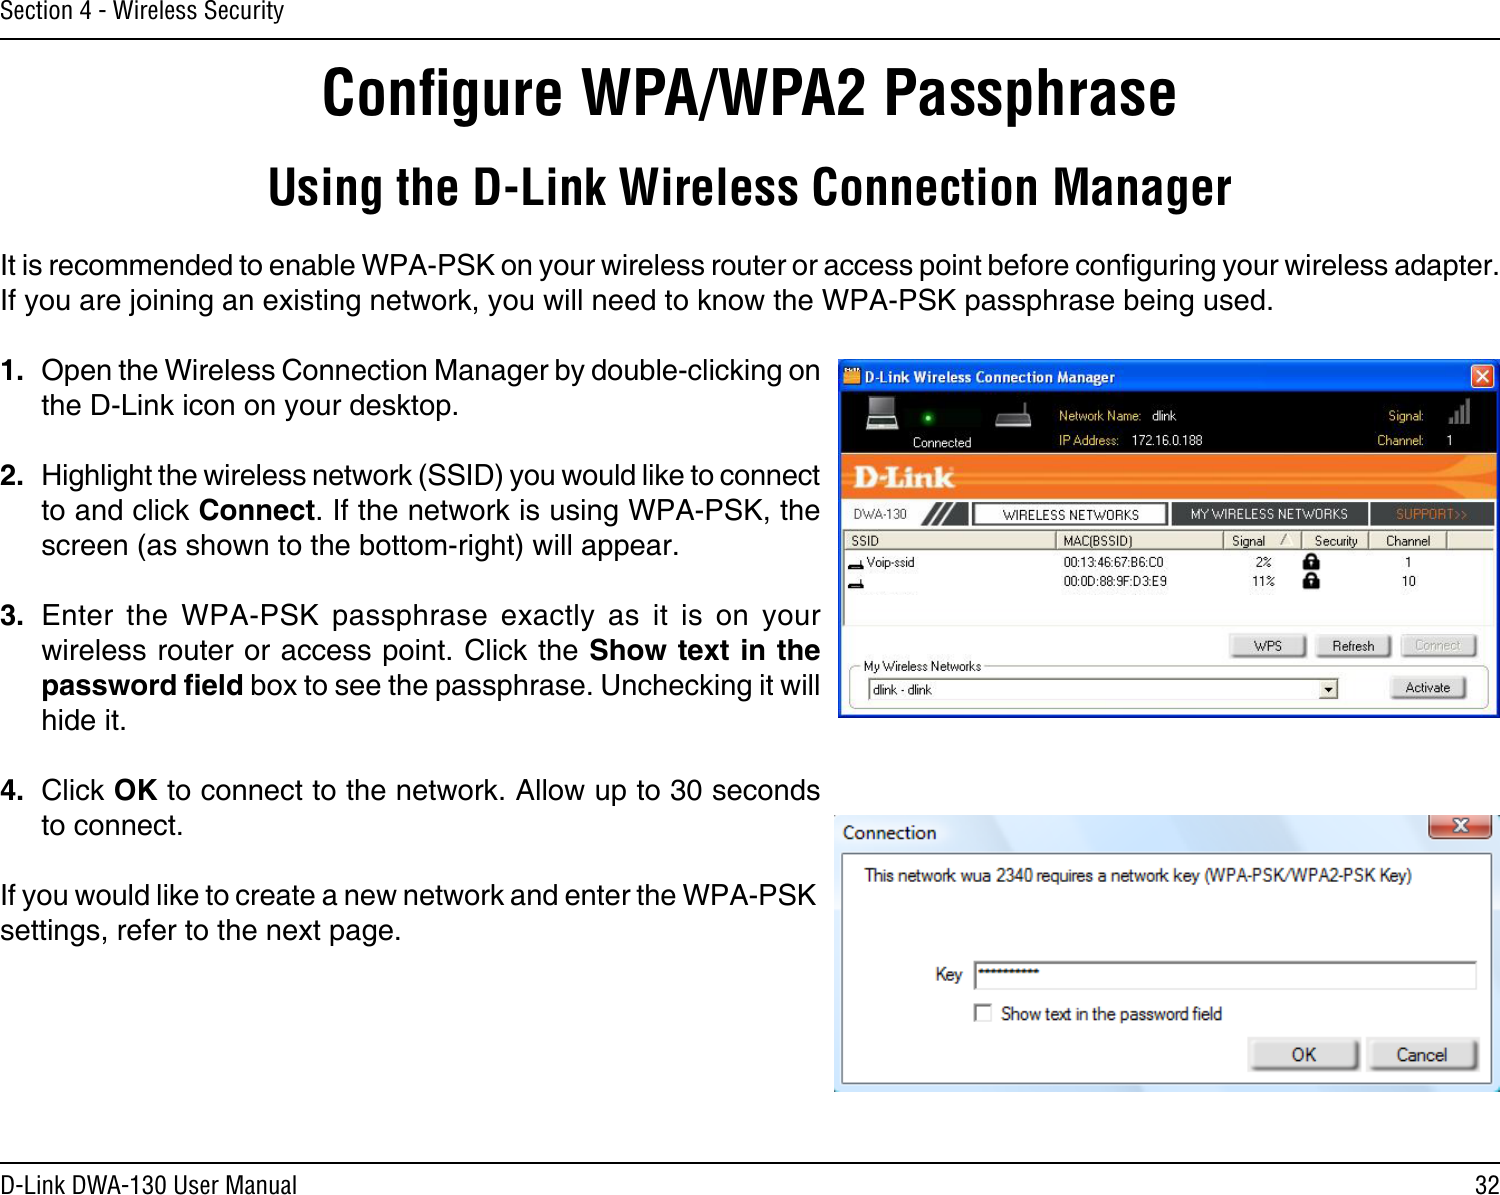 32D-Link DWA-130 User ManualSection 4 - Wireless SecurityConﬁgure WPA/WPA2 PassphraseUsing the D-Link Wireless Connection ManagerIt is recommended to enable WPA-PSK on your wireless router or access point before conguring your wireless adapter. If you are joining an existing network, you will need to know the WPA-PSK passphrase being used.1.  Open the Wireless Connection Manager by double-clicking on the D-Link icon on your desktop. 2.  Highlight the wireless network (SSID) you would like to connect to and click Connect. If the network is using WPA-PSK, the screen (as shown to the bottom-right) will appear. 3.  Enter  the  WPA-PSK  passphrase  exactly  as  it  is  on  your wireless router or access point. Click the Show text in the password eld box to see the passphrase. Unchecking it will hide it.4.  Click OK to connect to the network. Allow up to 30 seconds to connect.If you would like to create a new network and enter the WPA-PSK settings, refer to the next page.